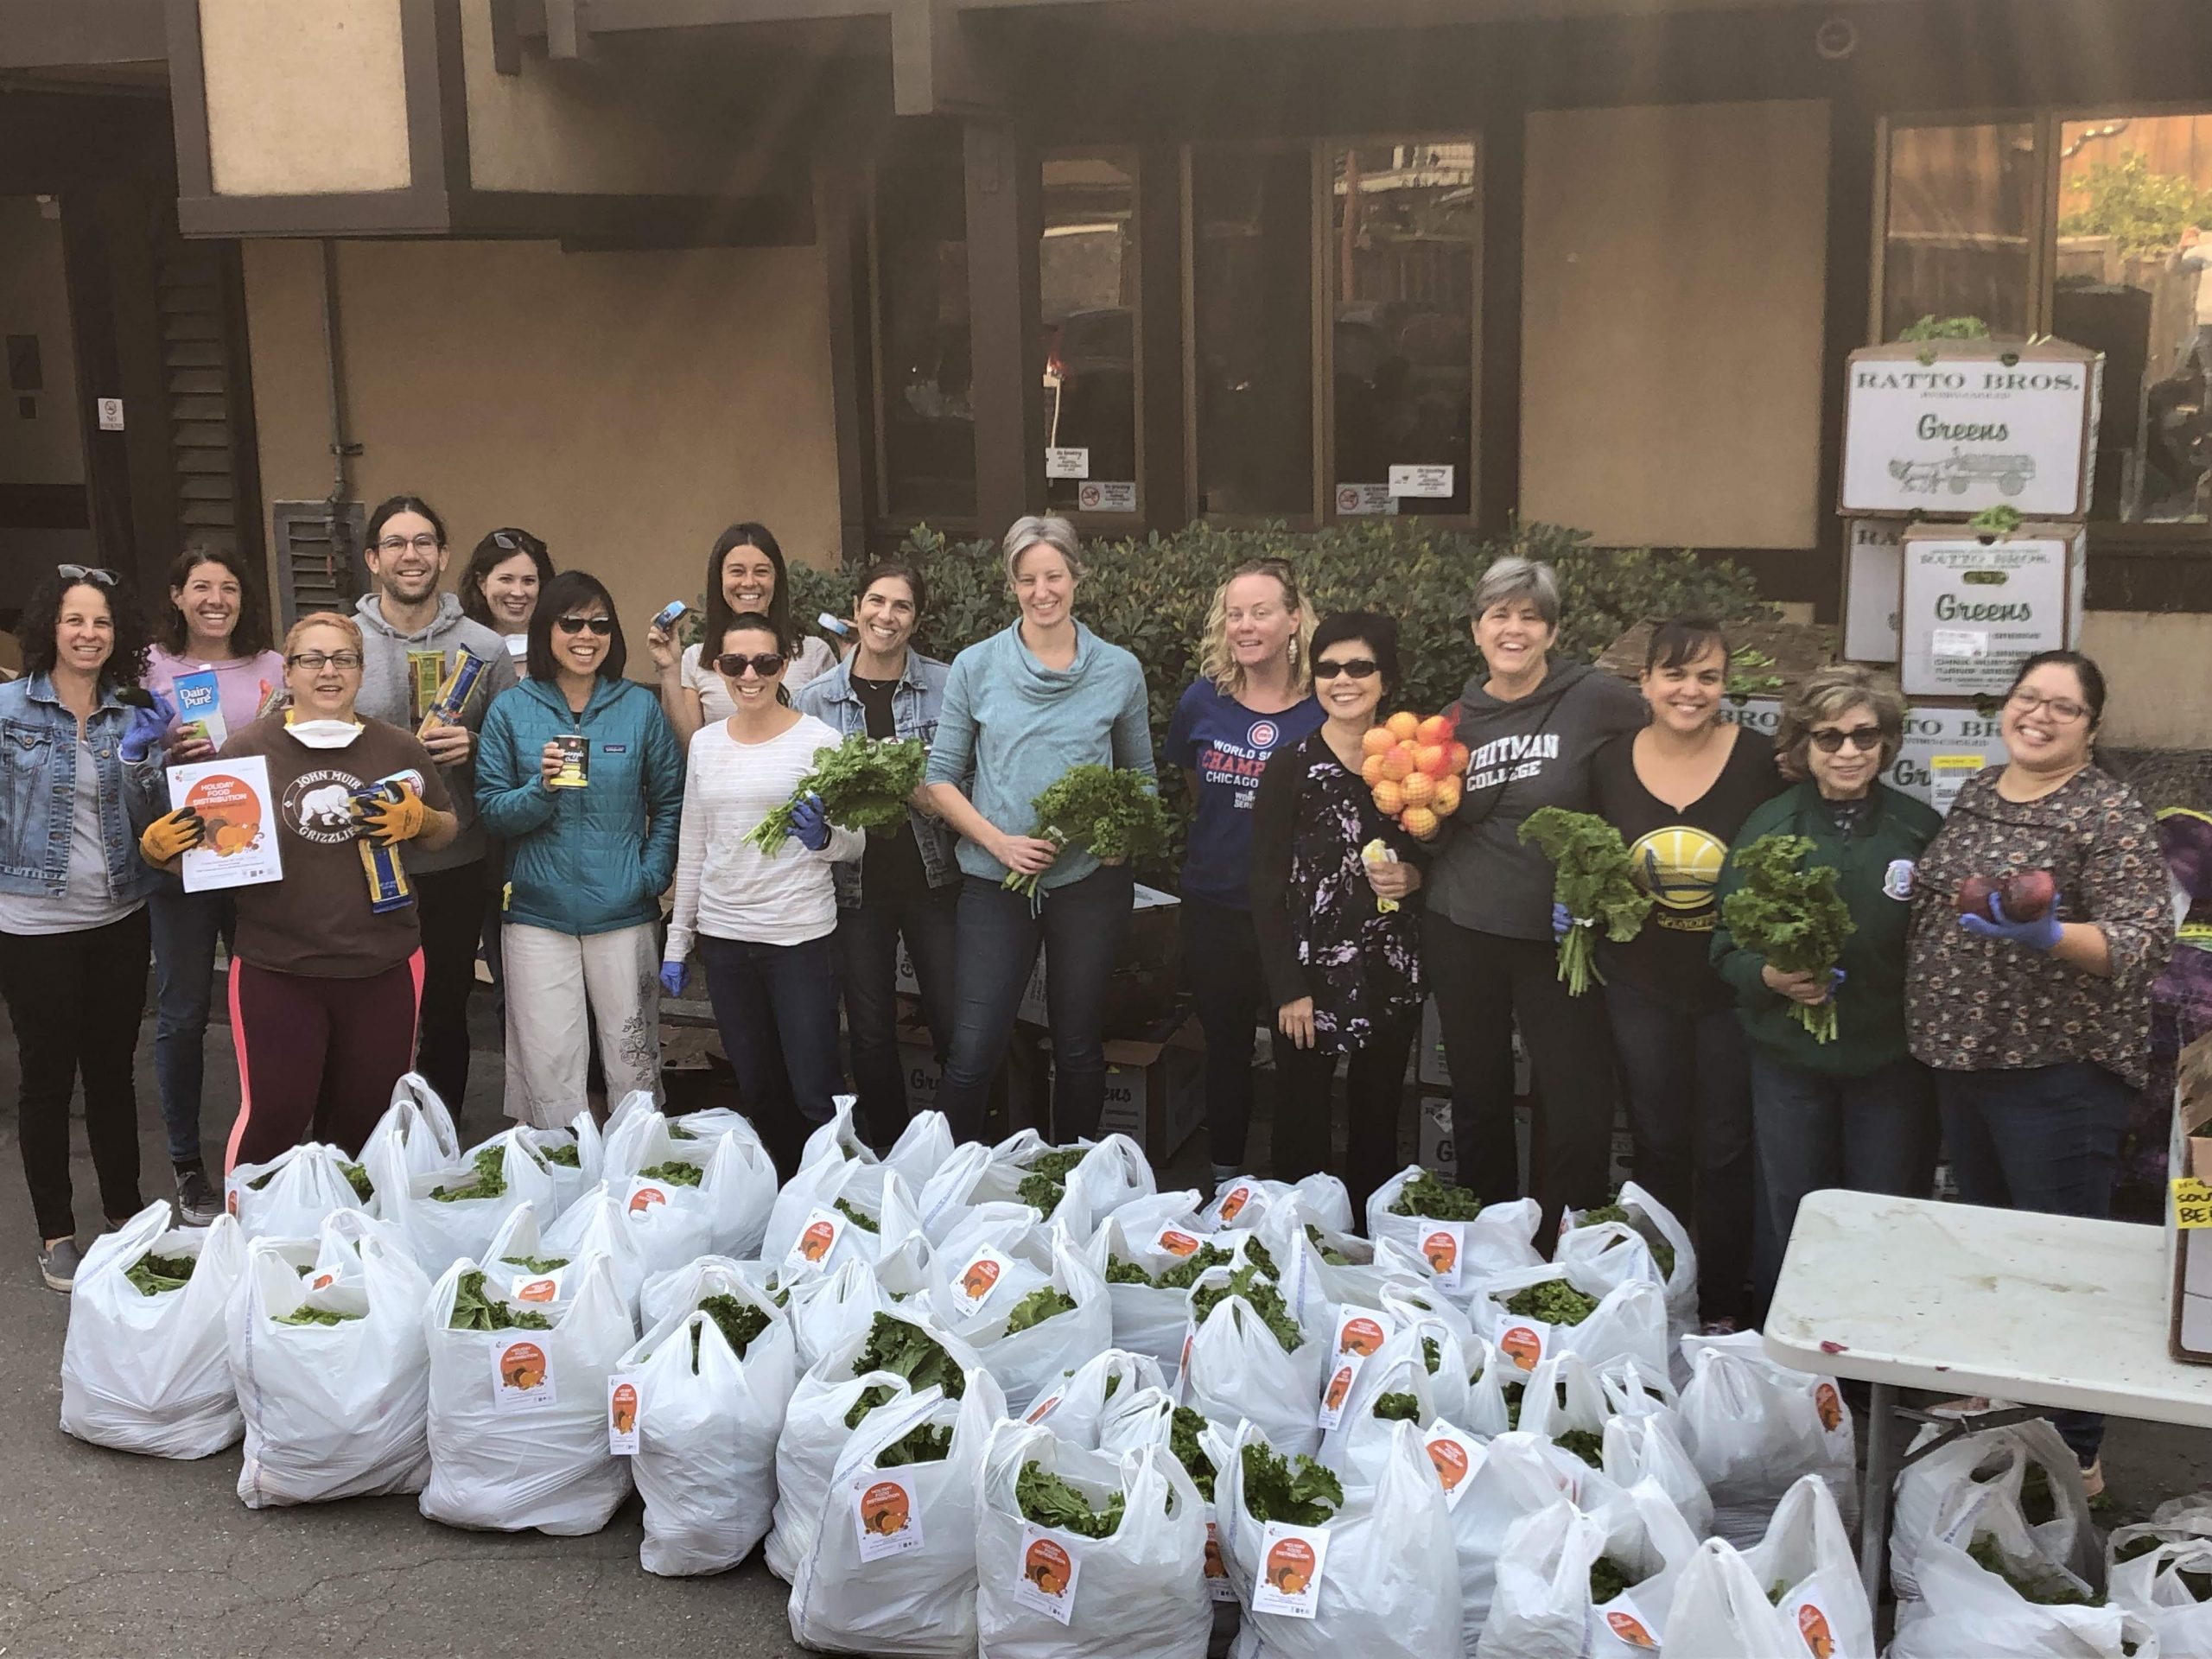 ‘Game-changing’ $600,000 grant from Bayer Fund will support Berkeley Food Network, Alameda County Community Food Bank